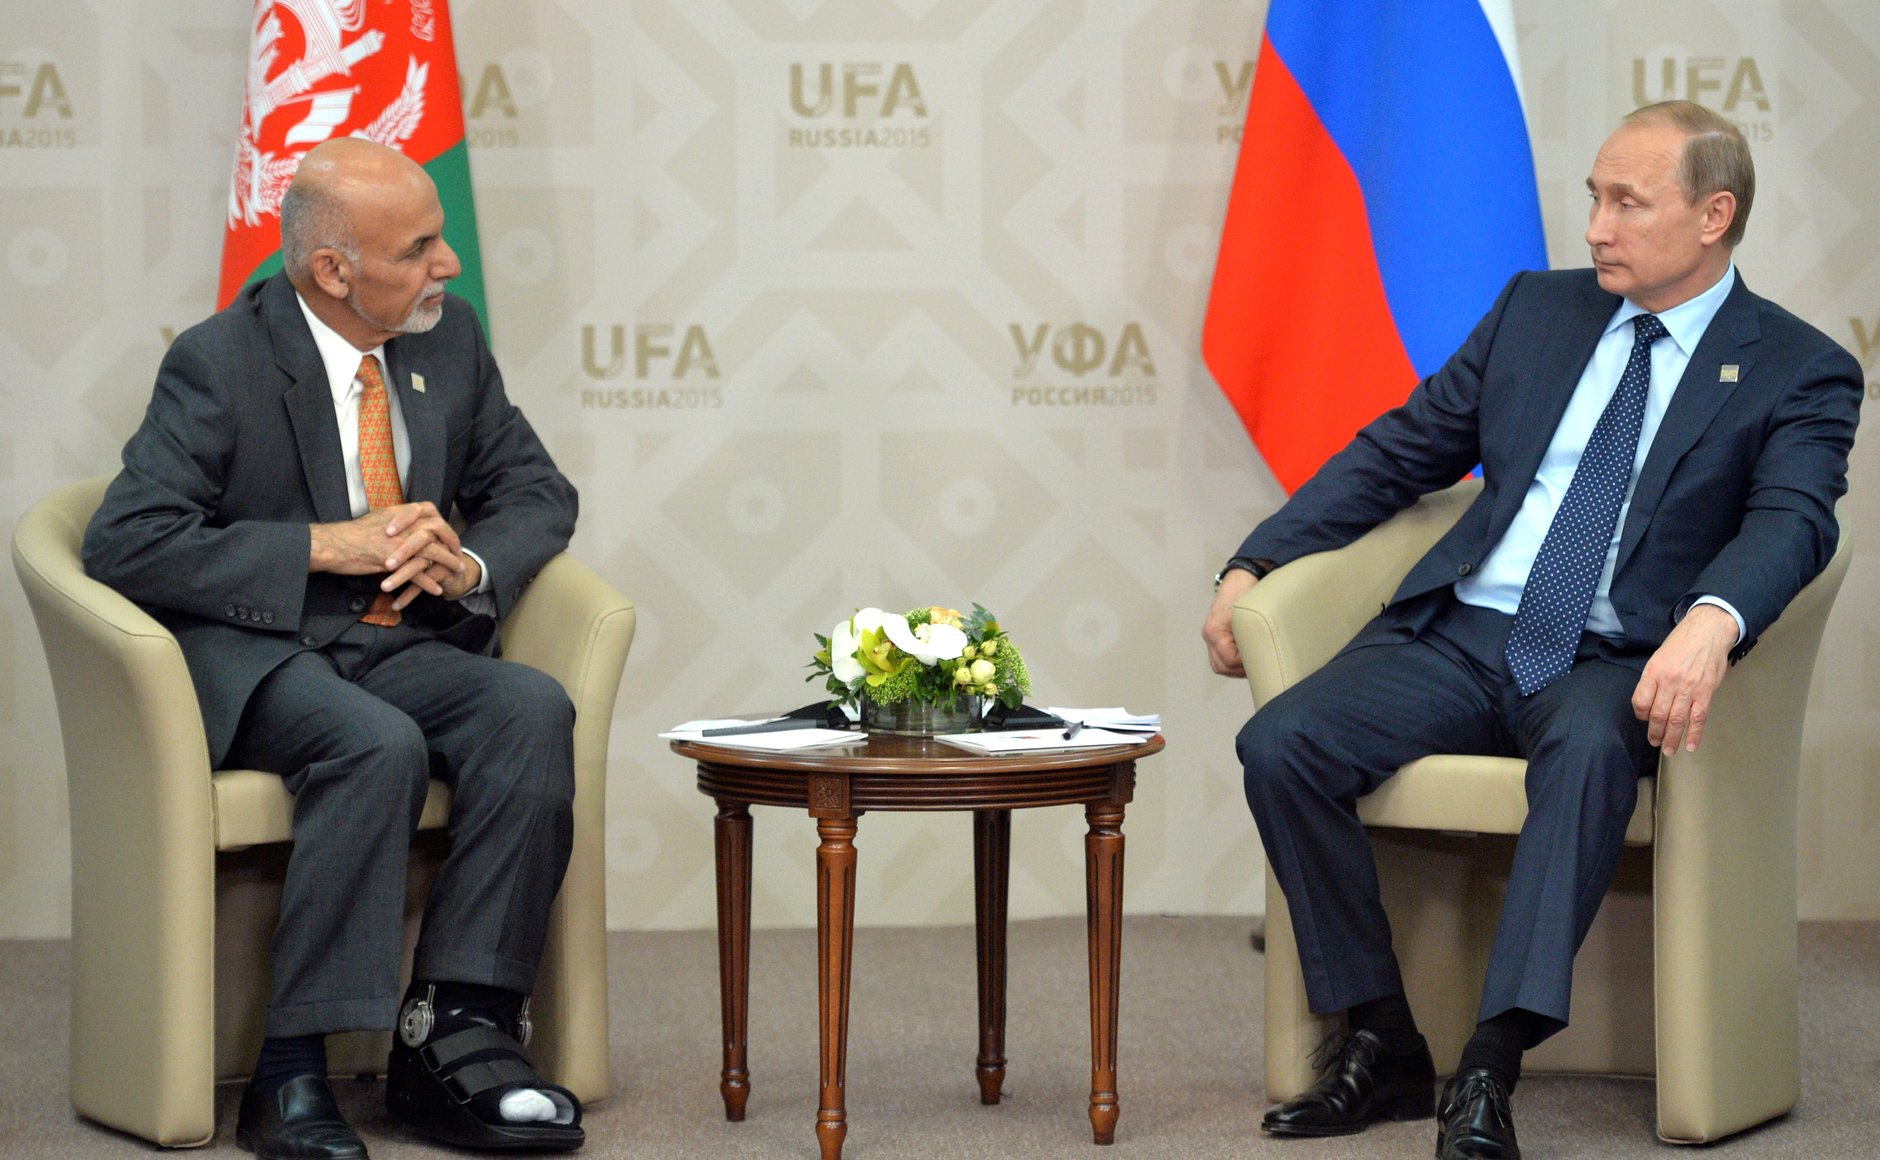 Vladimir Putin with Ashraf Ghani at the 2015 SCO summit in Ufa. Russia has repeatedly expressed its backing for the Kabul government. Source: Kremlin.ru